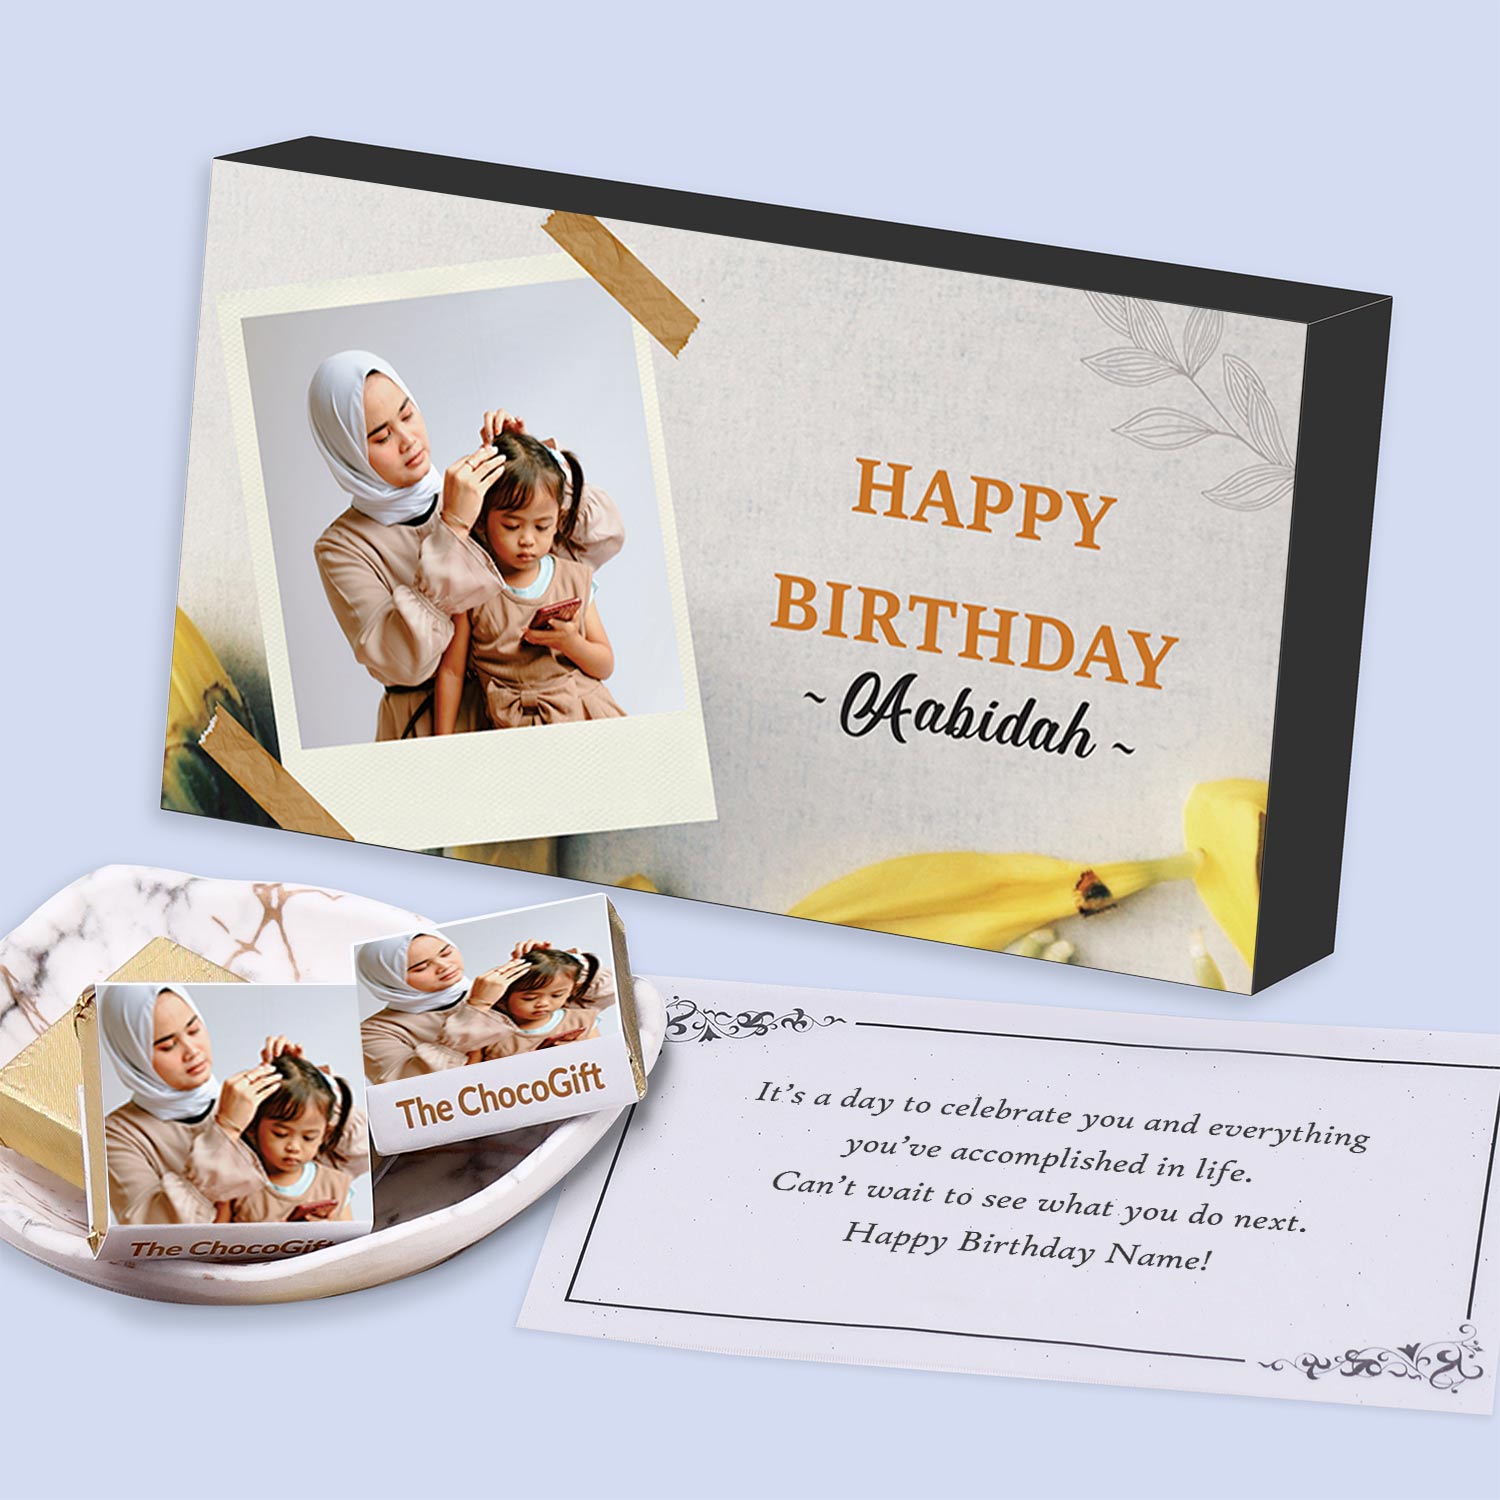 Personalized Gifts to Mom in India on Mother's Day